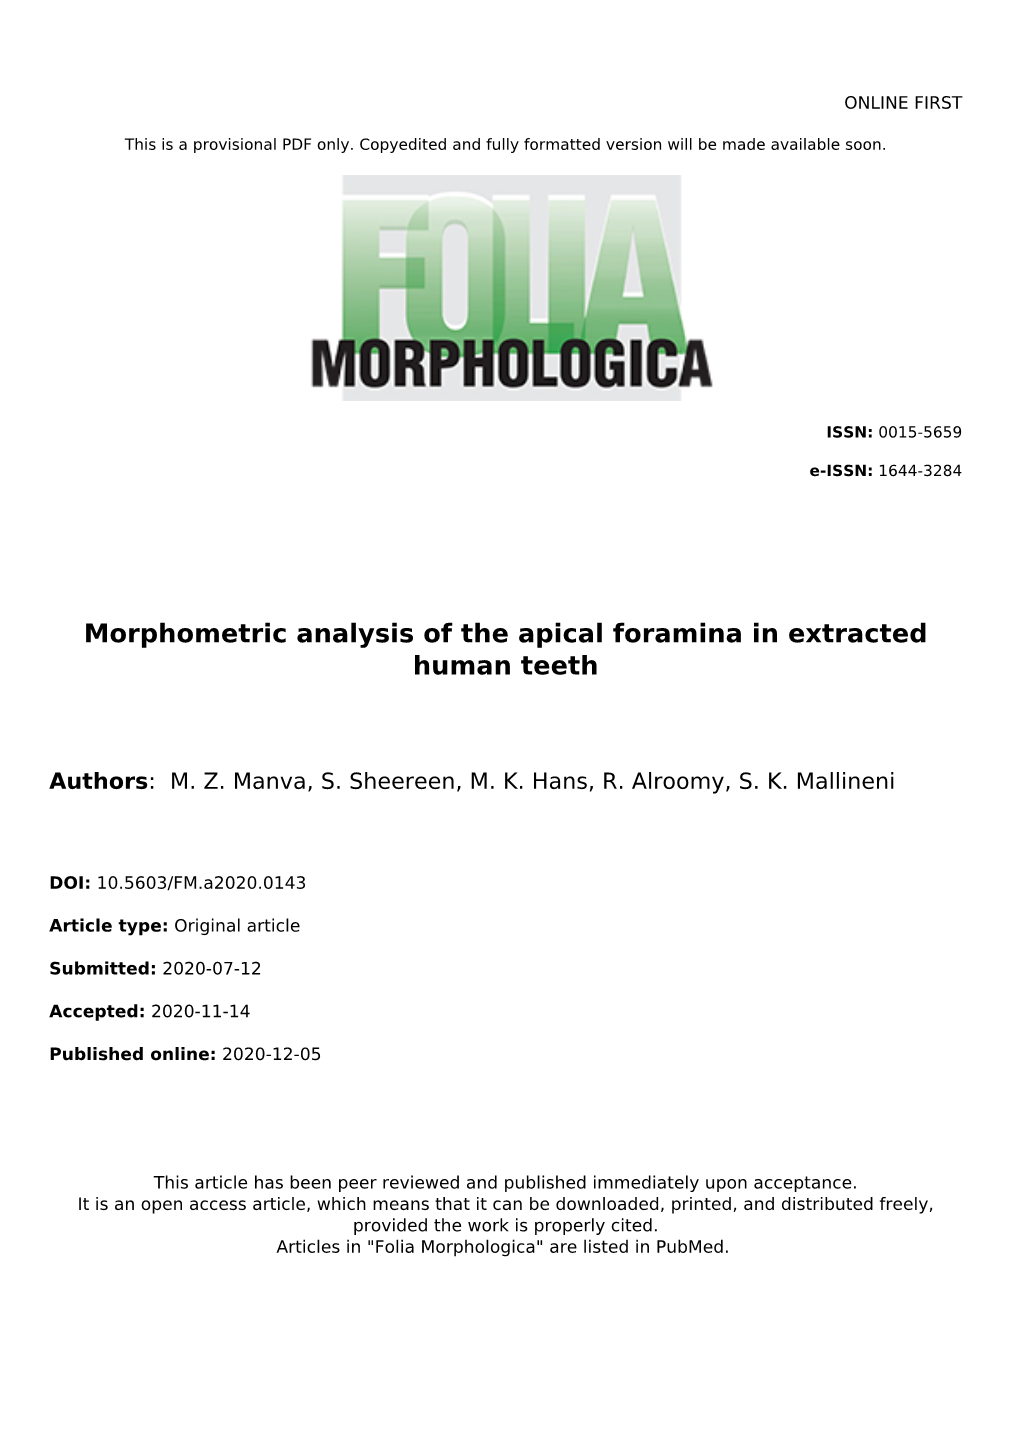 Morphometric Analysis of the Apical Foramina in Extracted Human Teeth